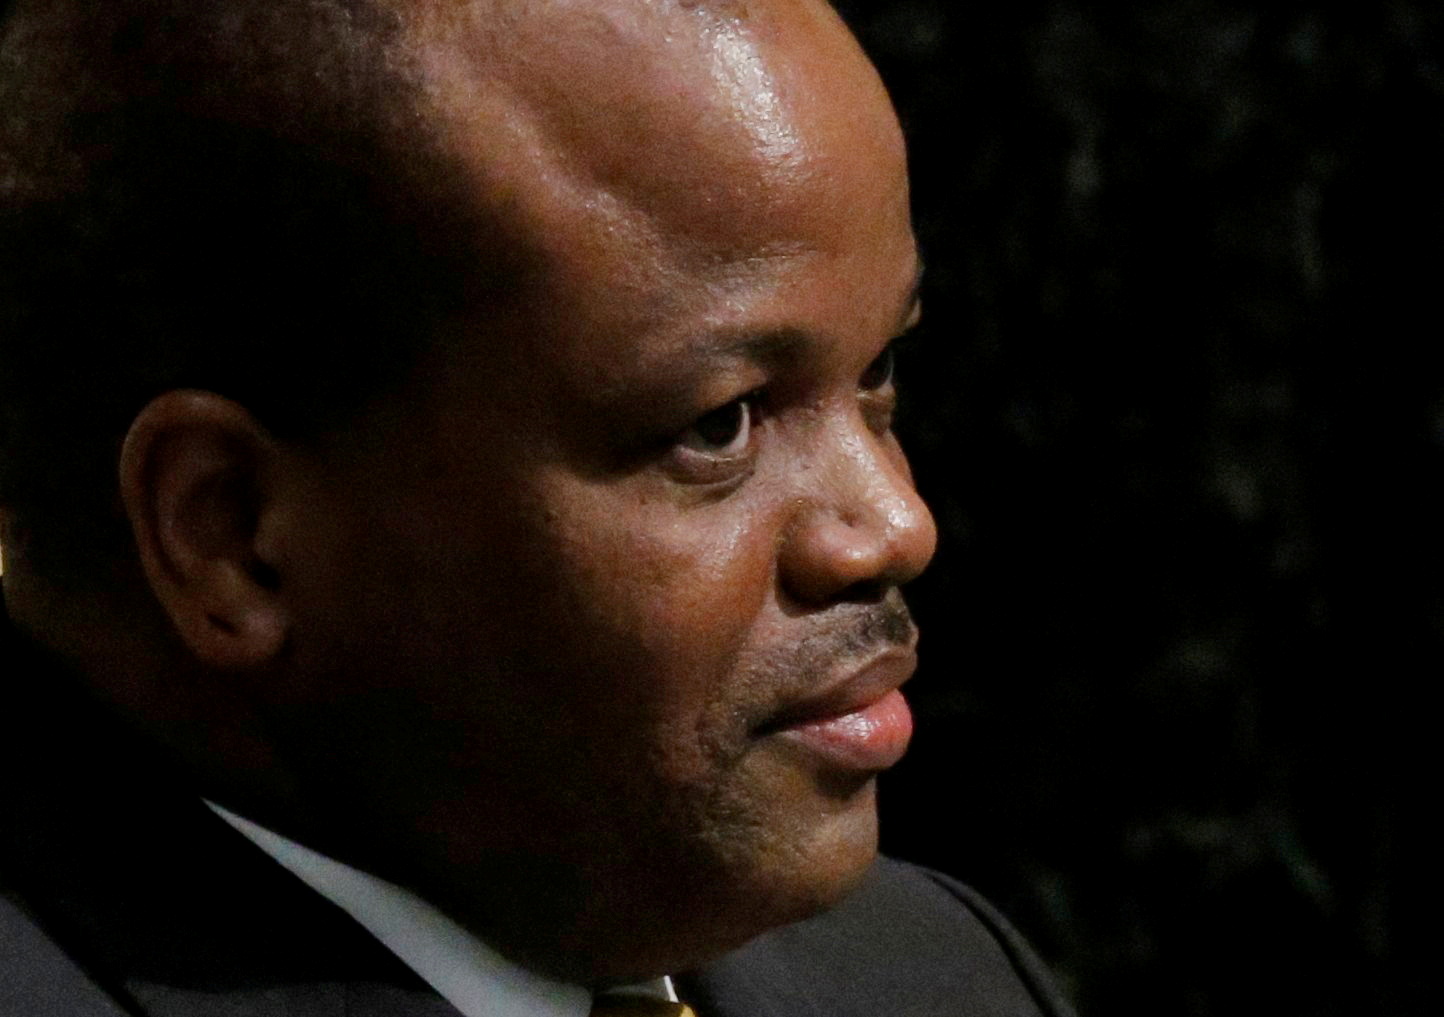 King Mswati III of Swaziland waits to address attendees during the 70th session of the United Nations General Assembly at the U.N. headquarters in New York